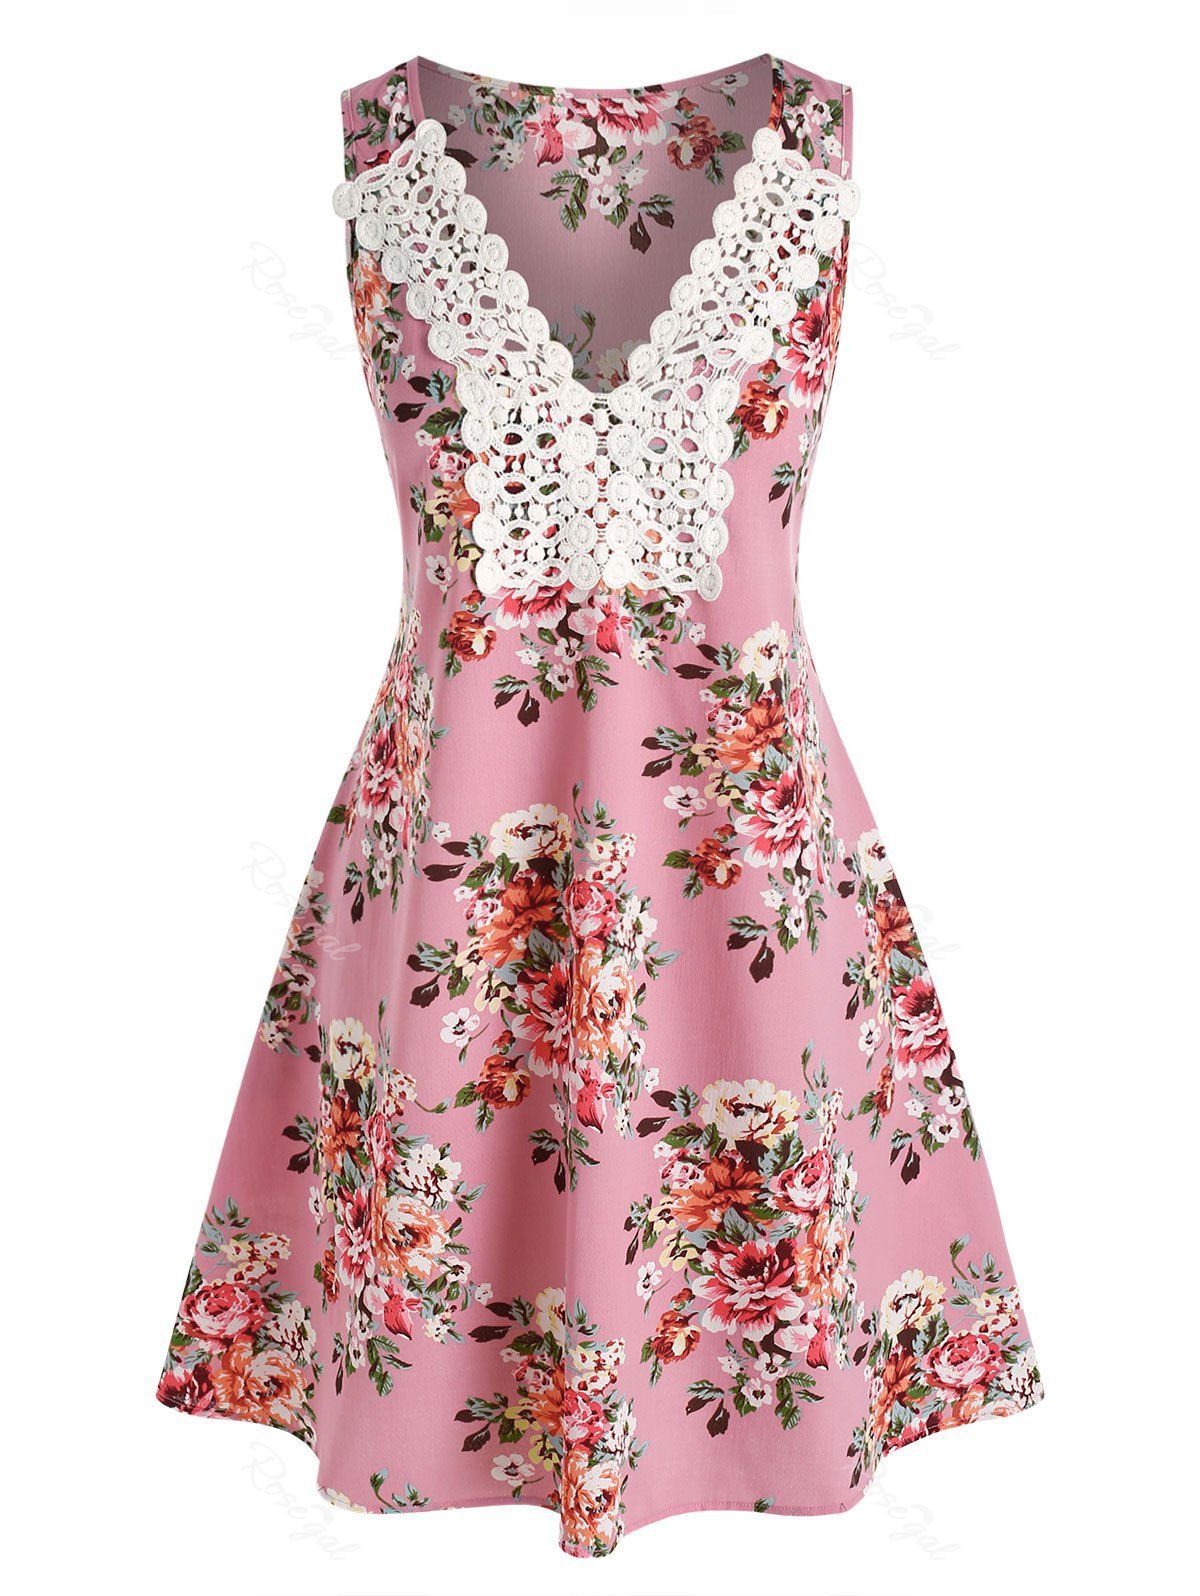 New Floral Printed Embroidery Lace Cottagecore Dress  